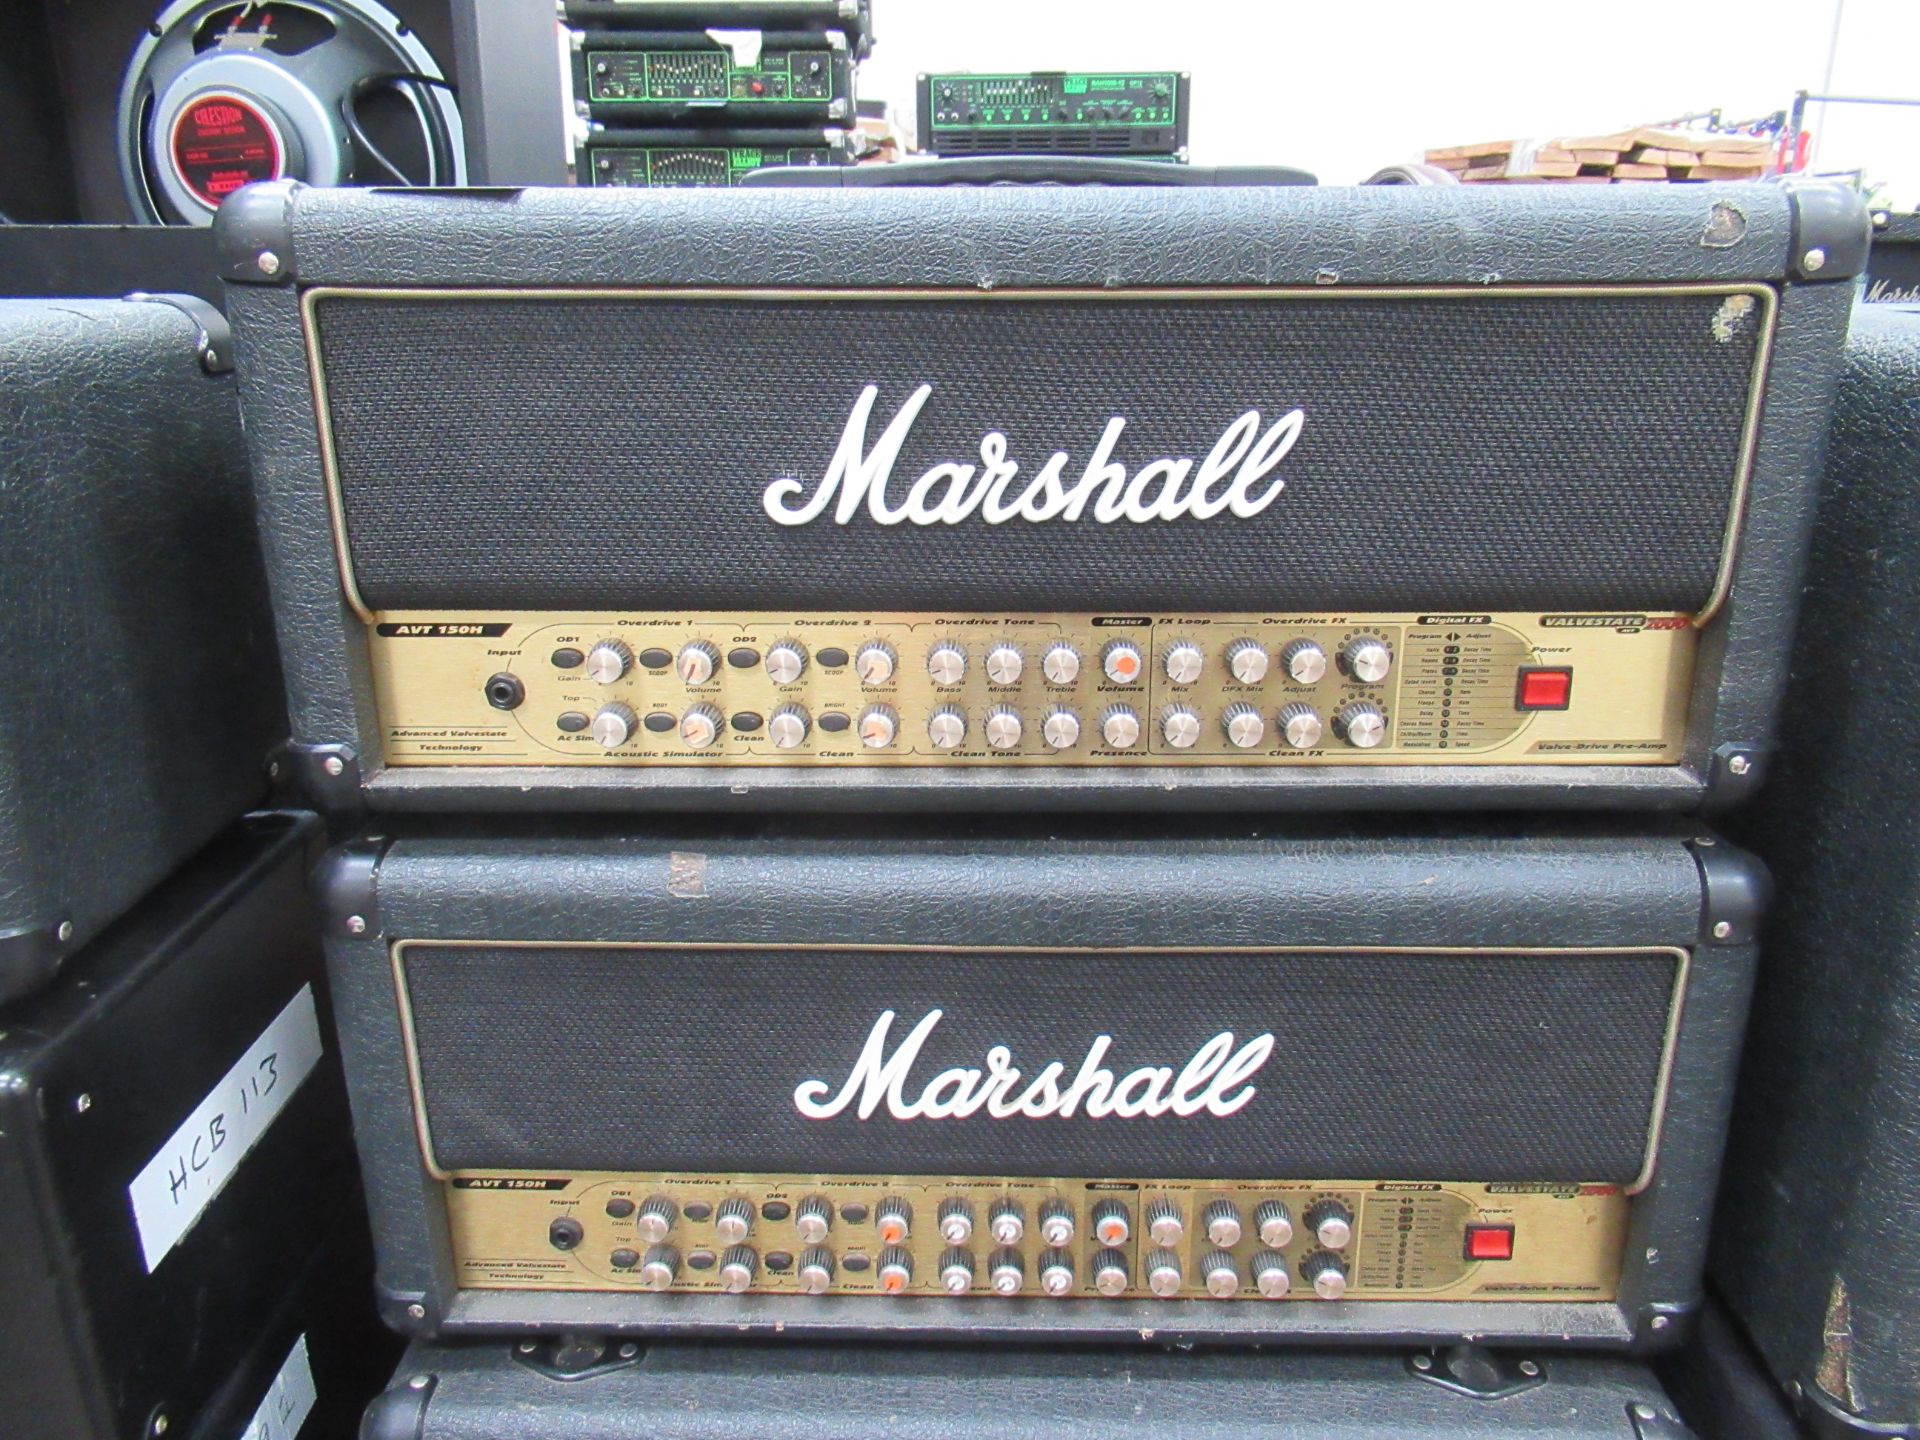 2x Marshall Amplifiers and 1x Speaker